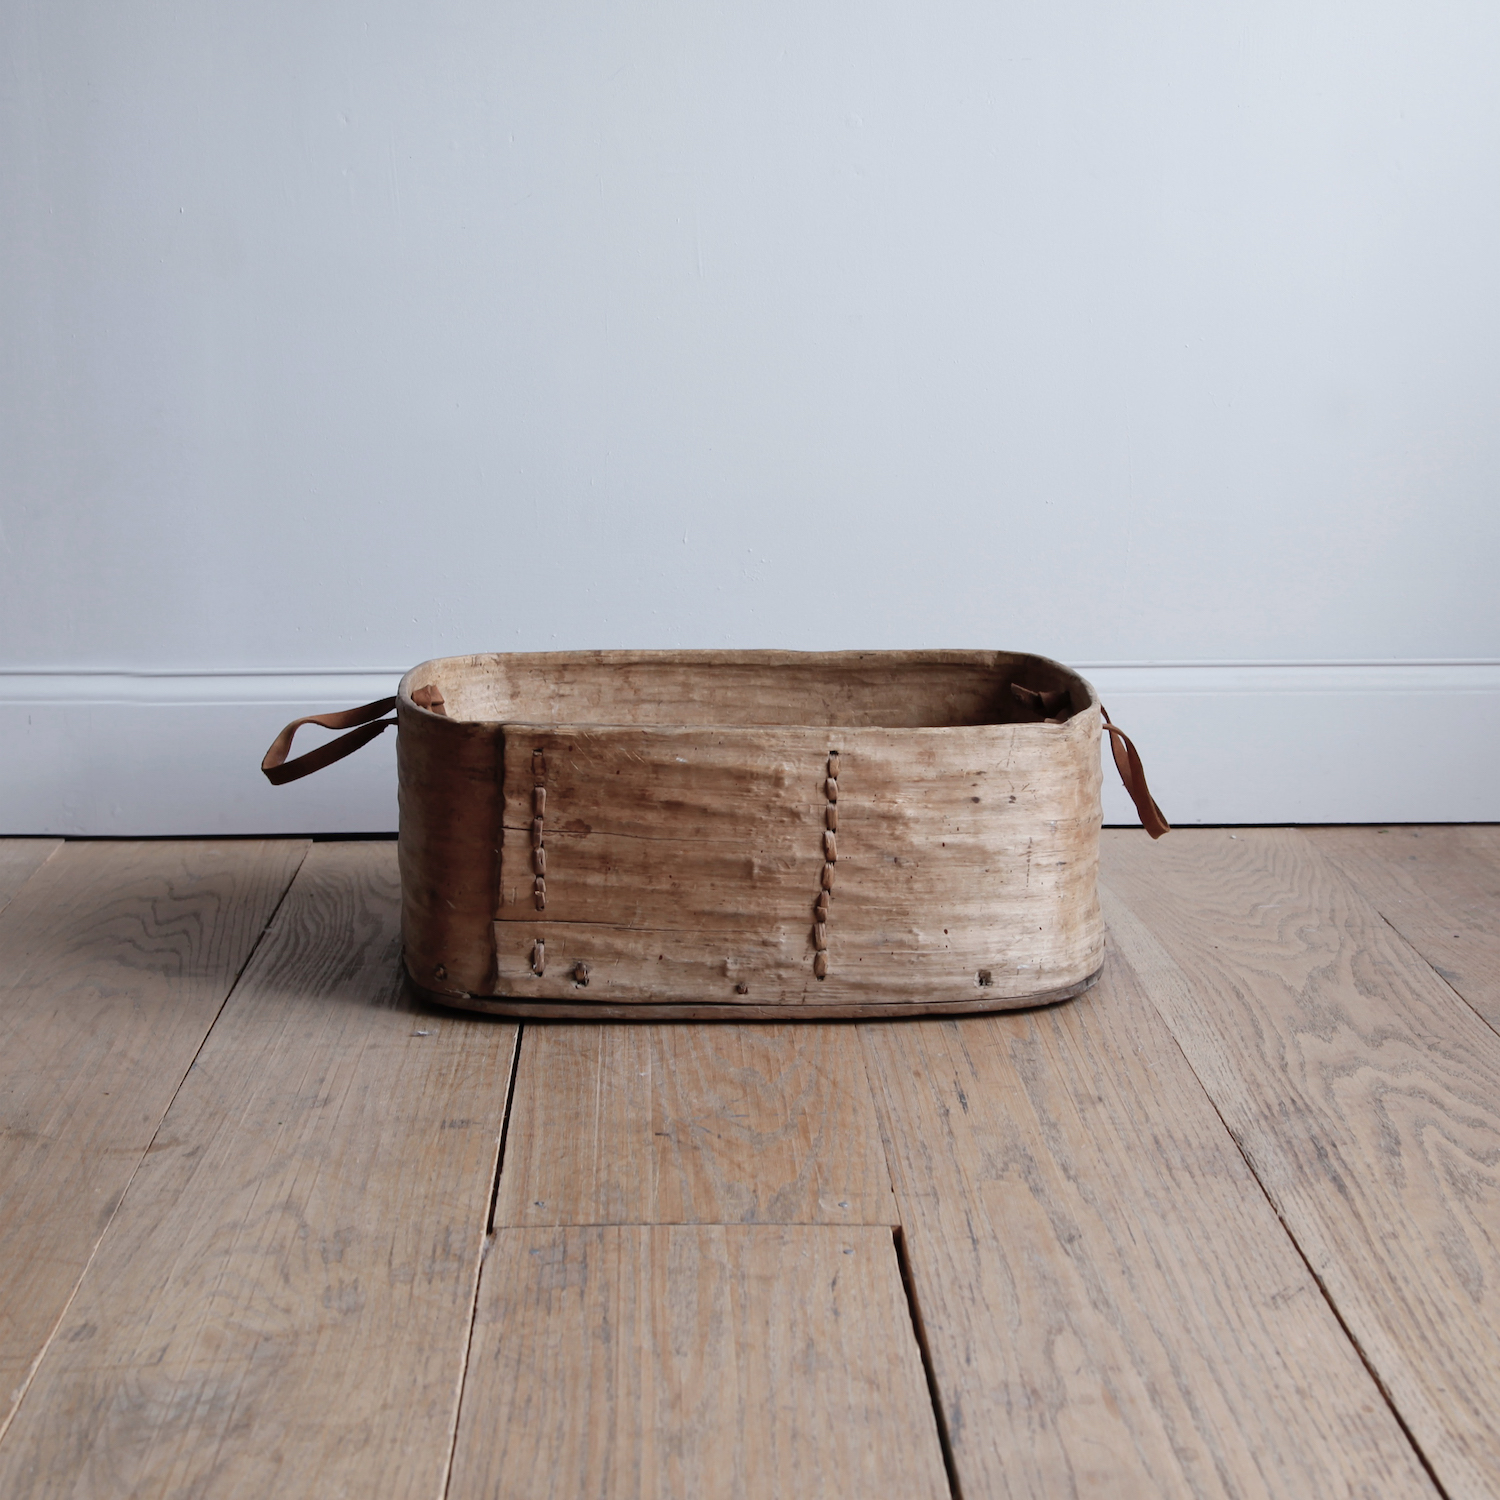 Hand-hewn Wooden Basket with Leather Handles